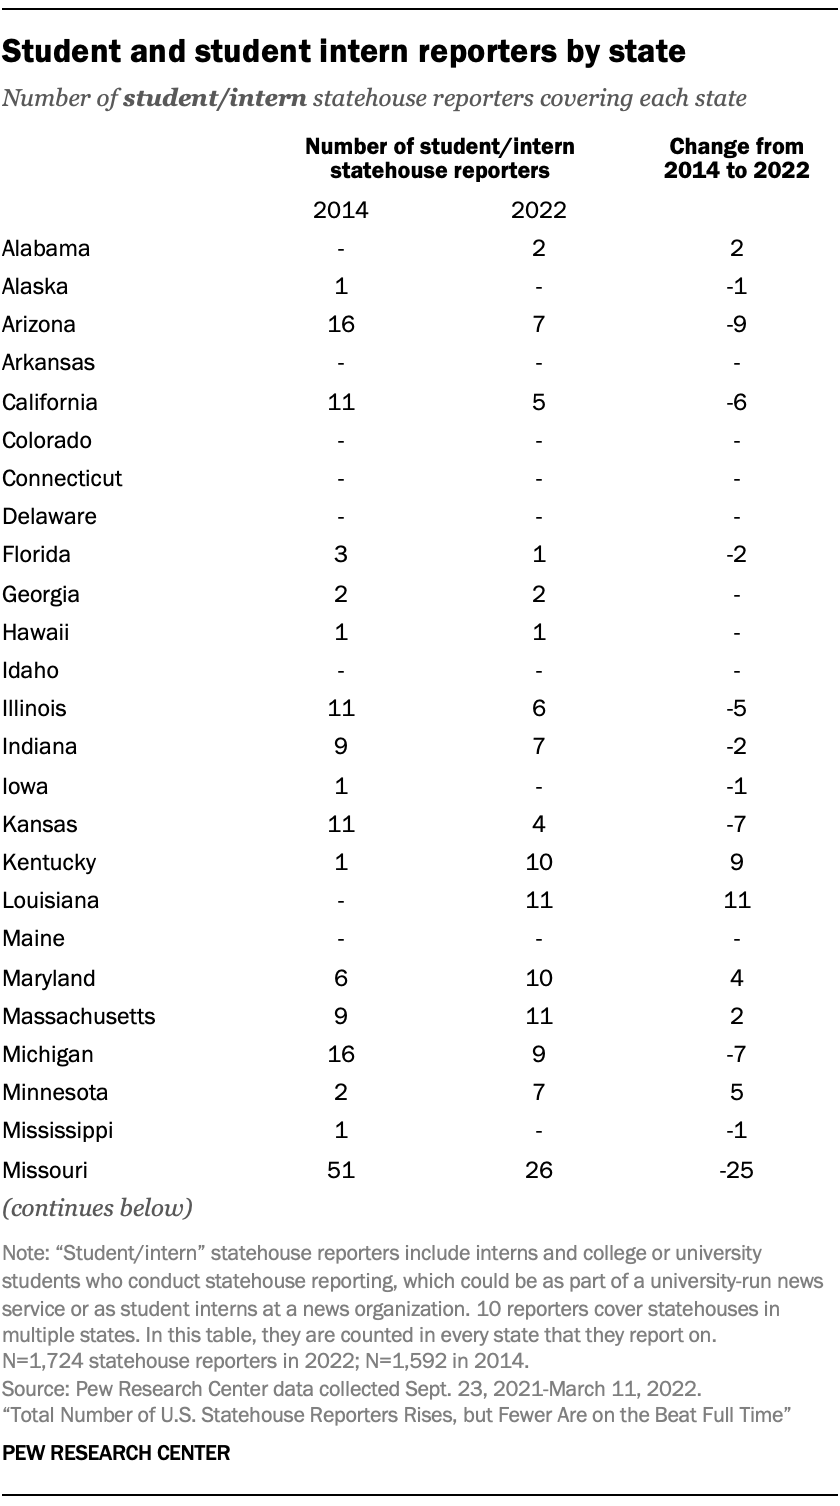 Student and student intern reporters by state (Alabama-Missouri)